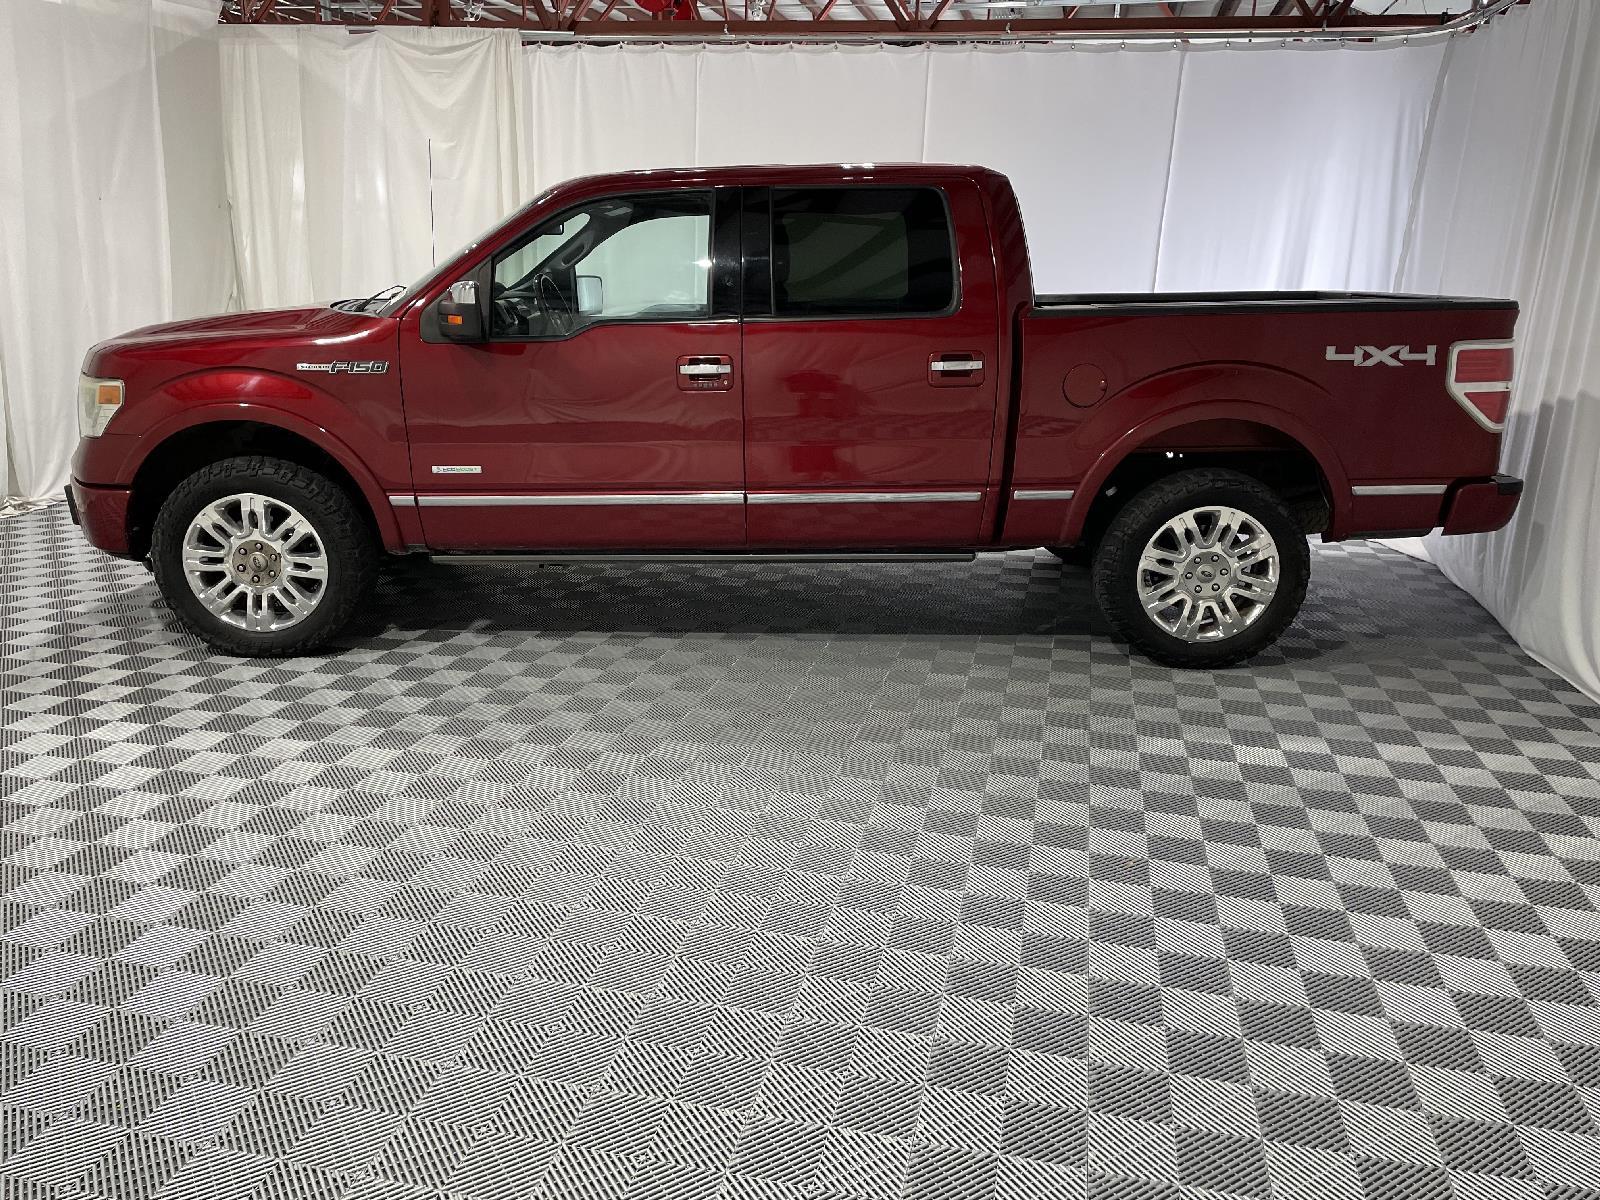 Used 2014 Ford F-150 Platinum Crew Cab Truck for sale in St Joseph MO